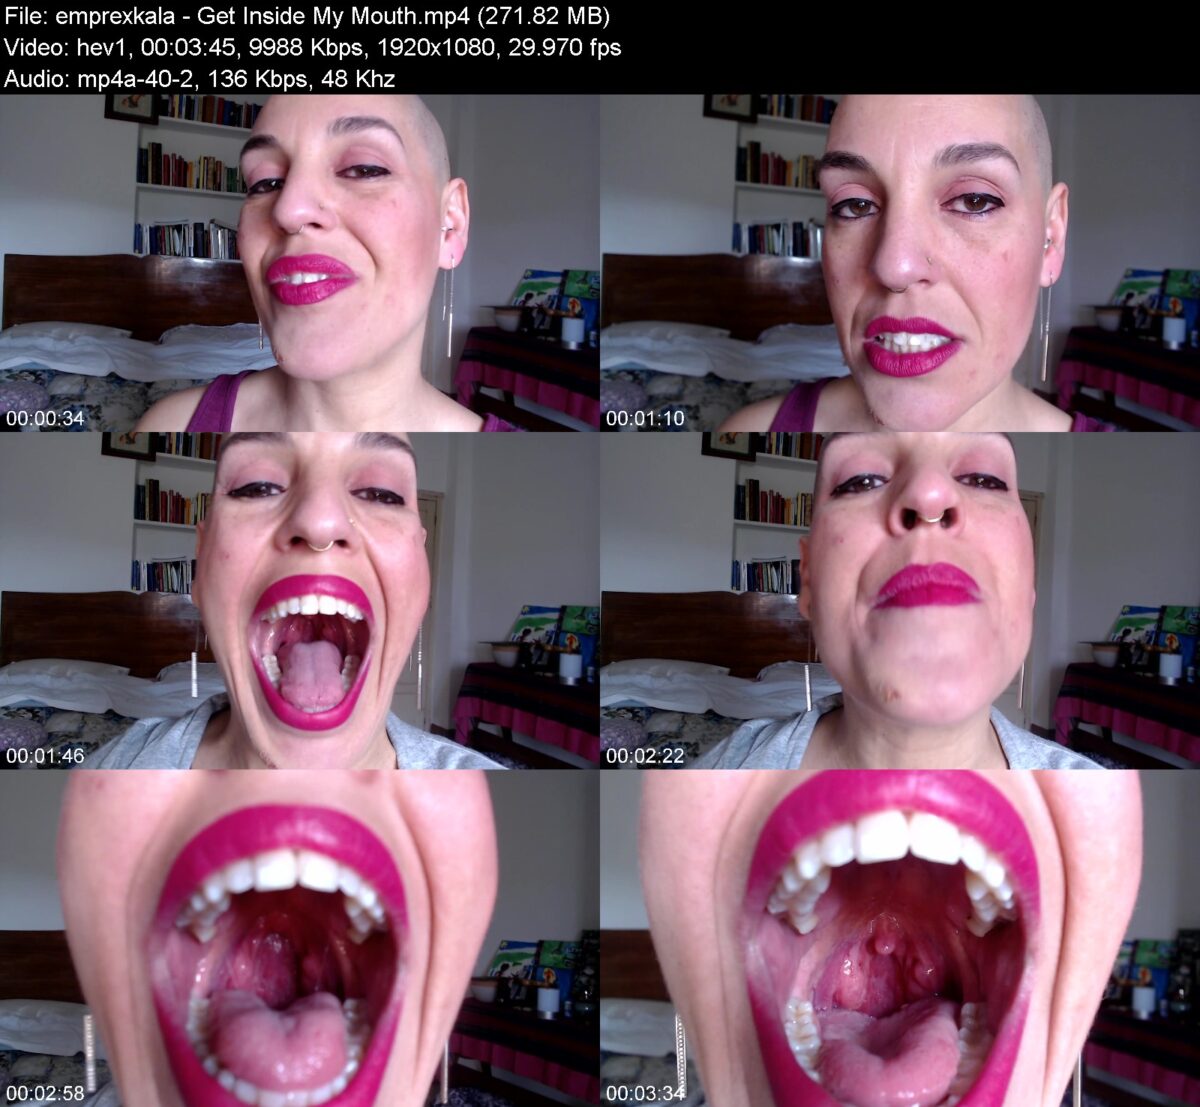 Actress: emprexkala. Title and Studio: Get Inside My Mouth